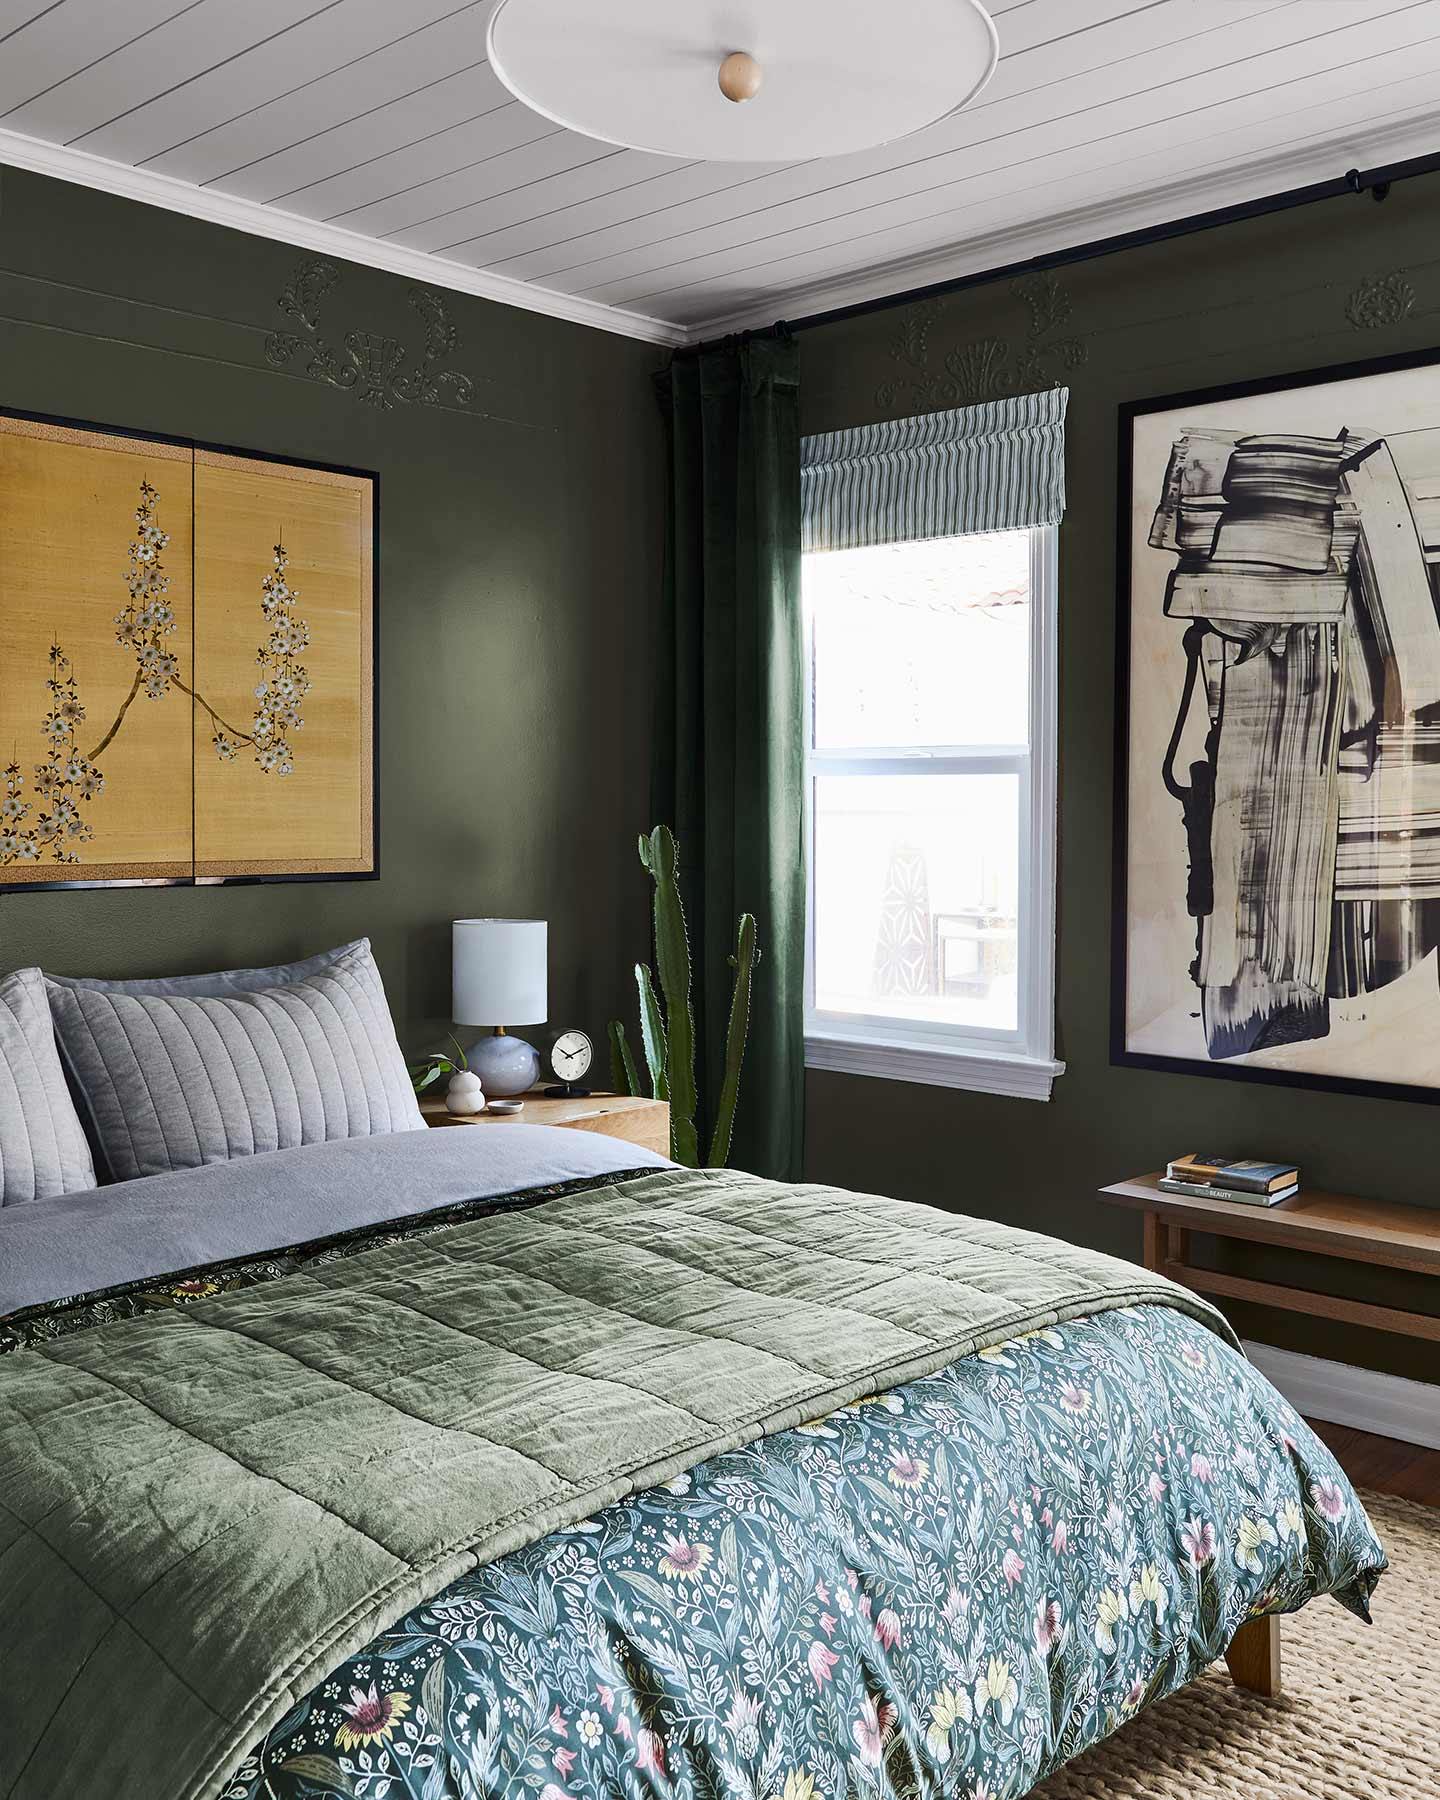 Small-space-friendly furniture keeps this petite dark green bedroom from feeling cramped.